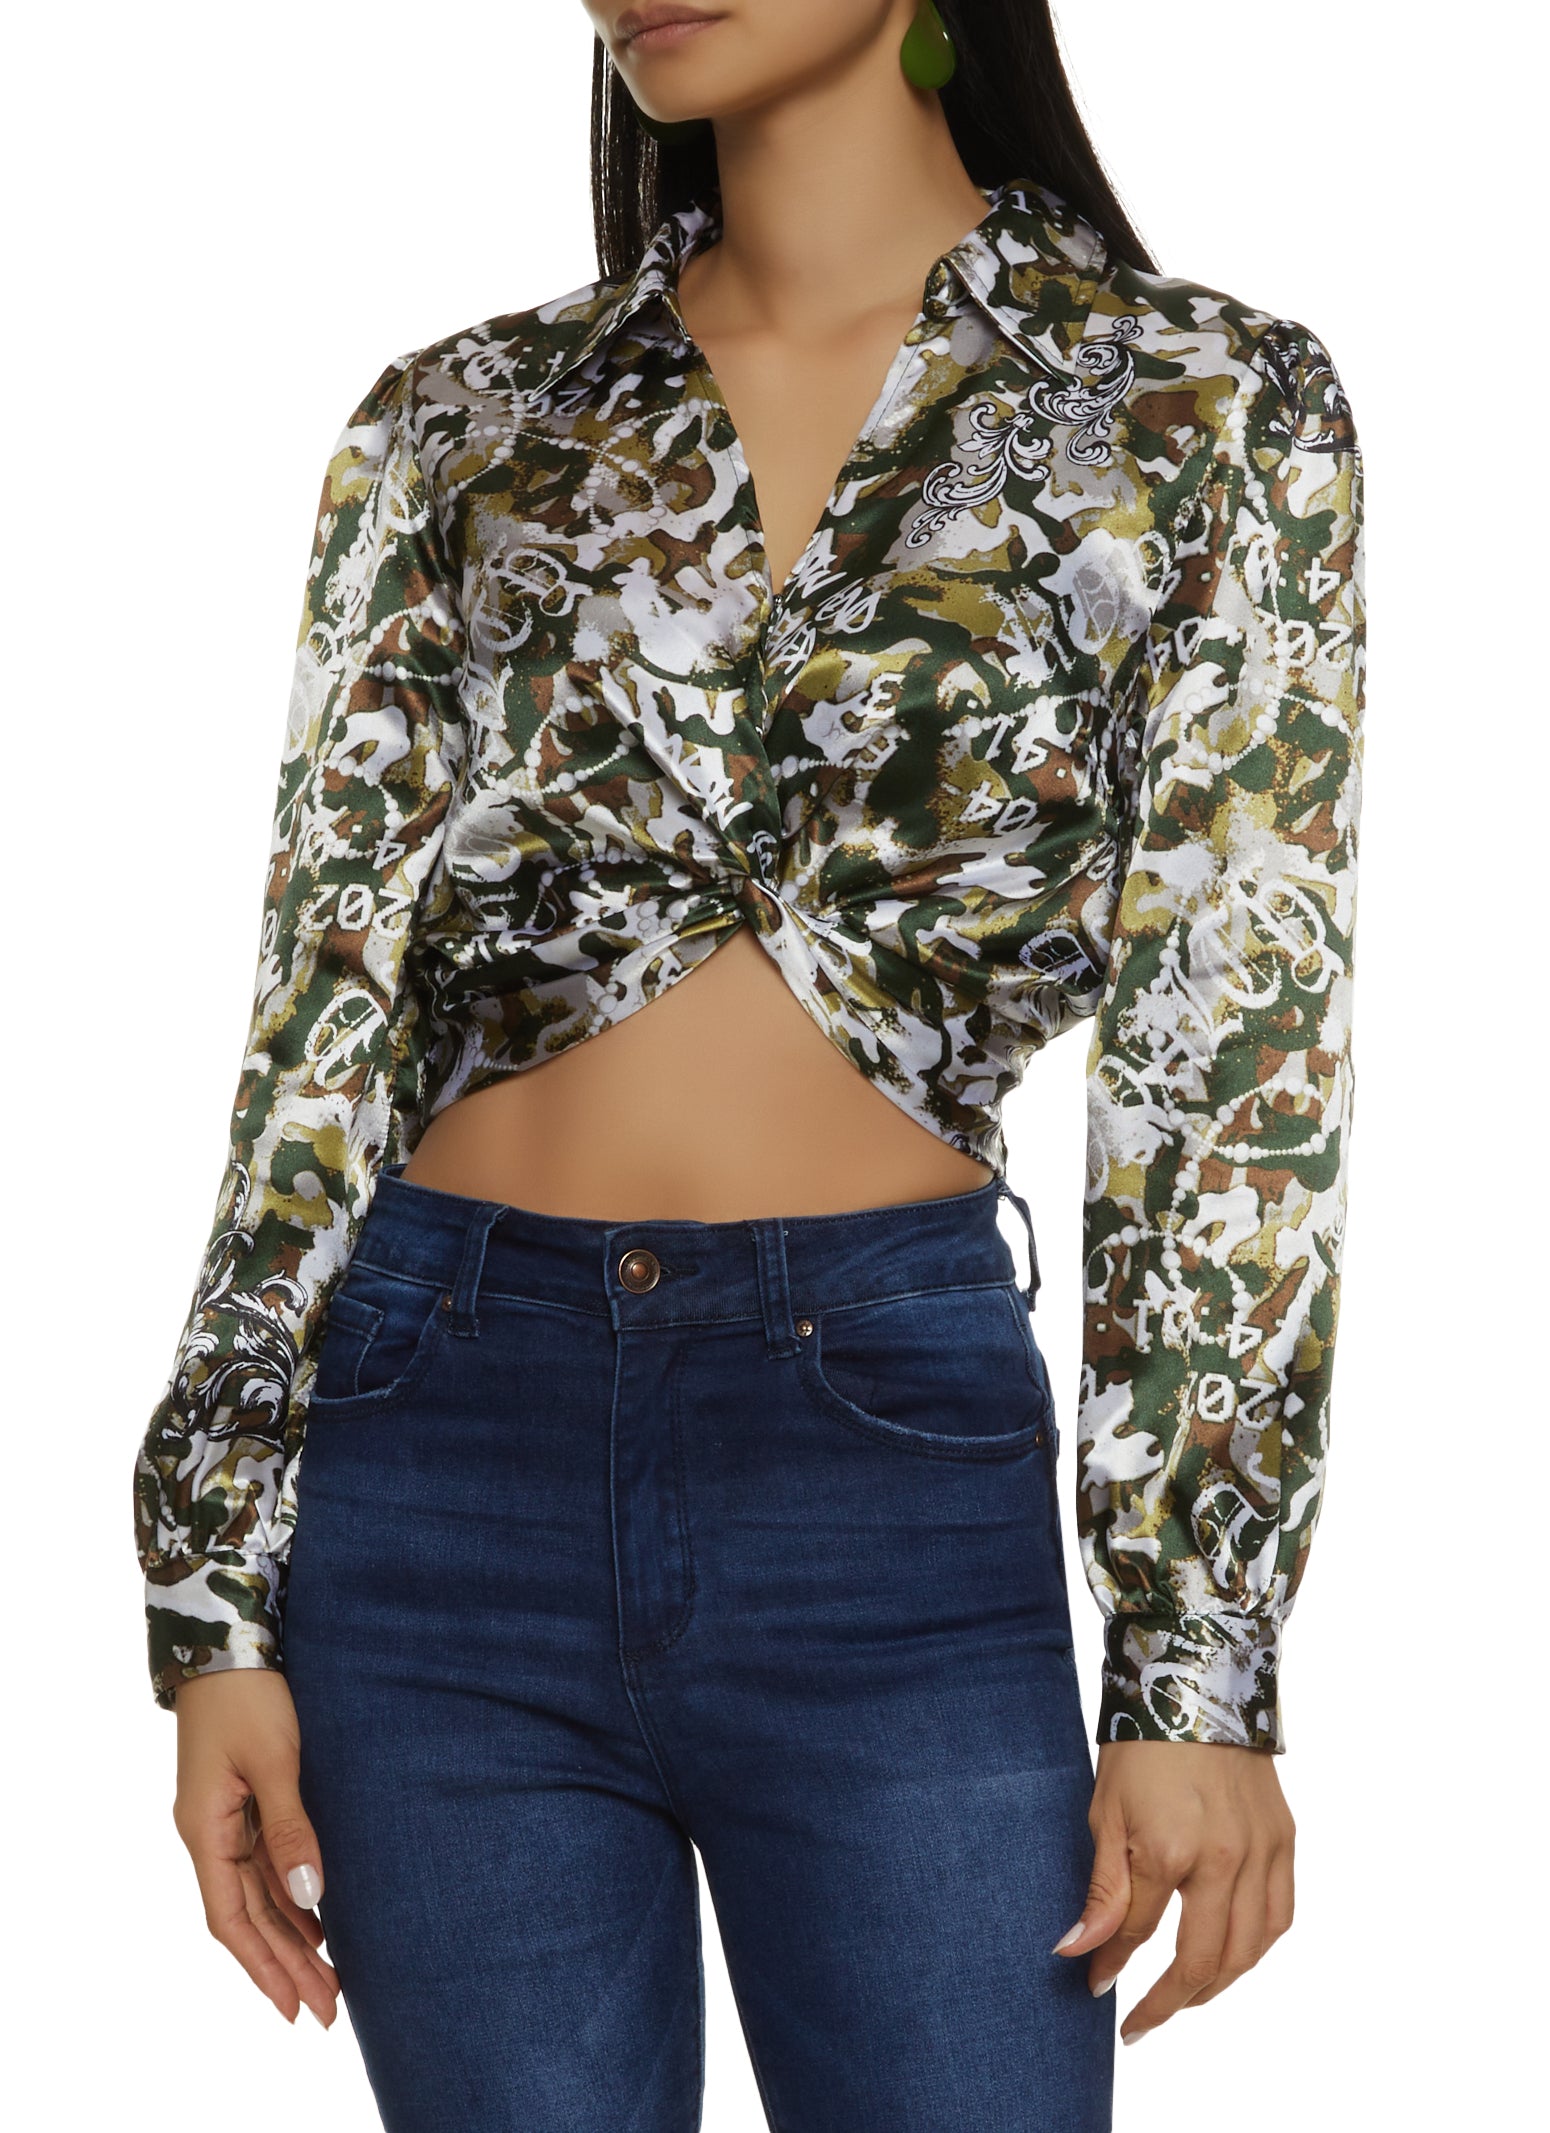 Womens Satin Patterned Twist Front Crop Top, M